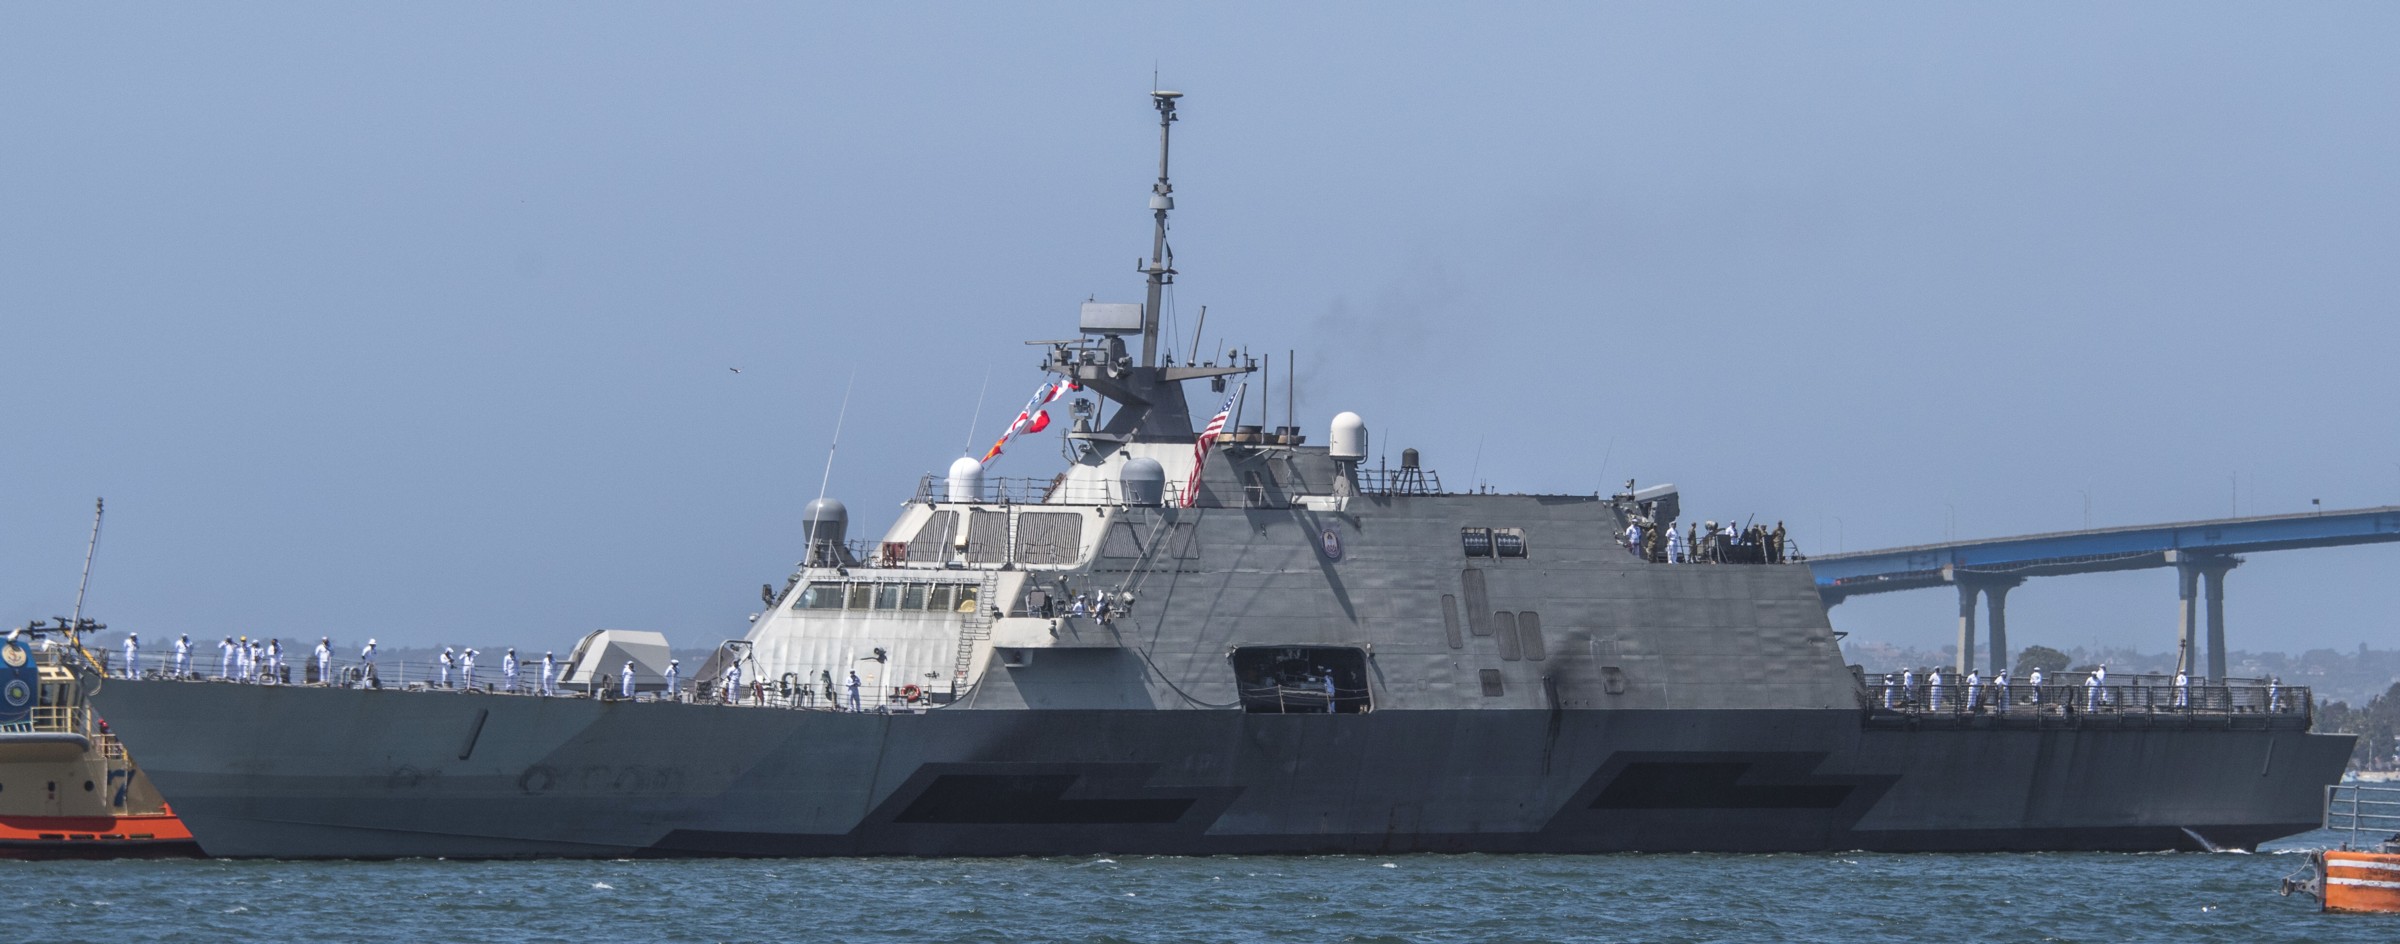 lcs-1 uss freedom class littoral combat ship us navy homecoming final deployment san diego 176